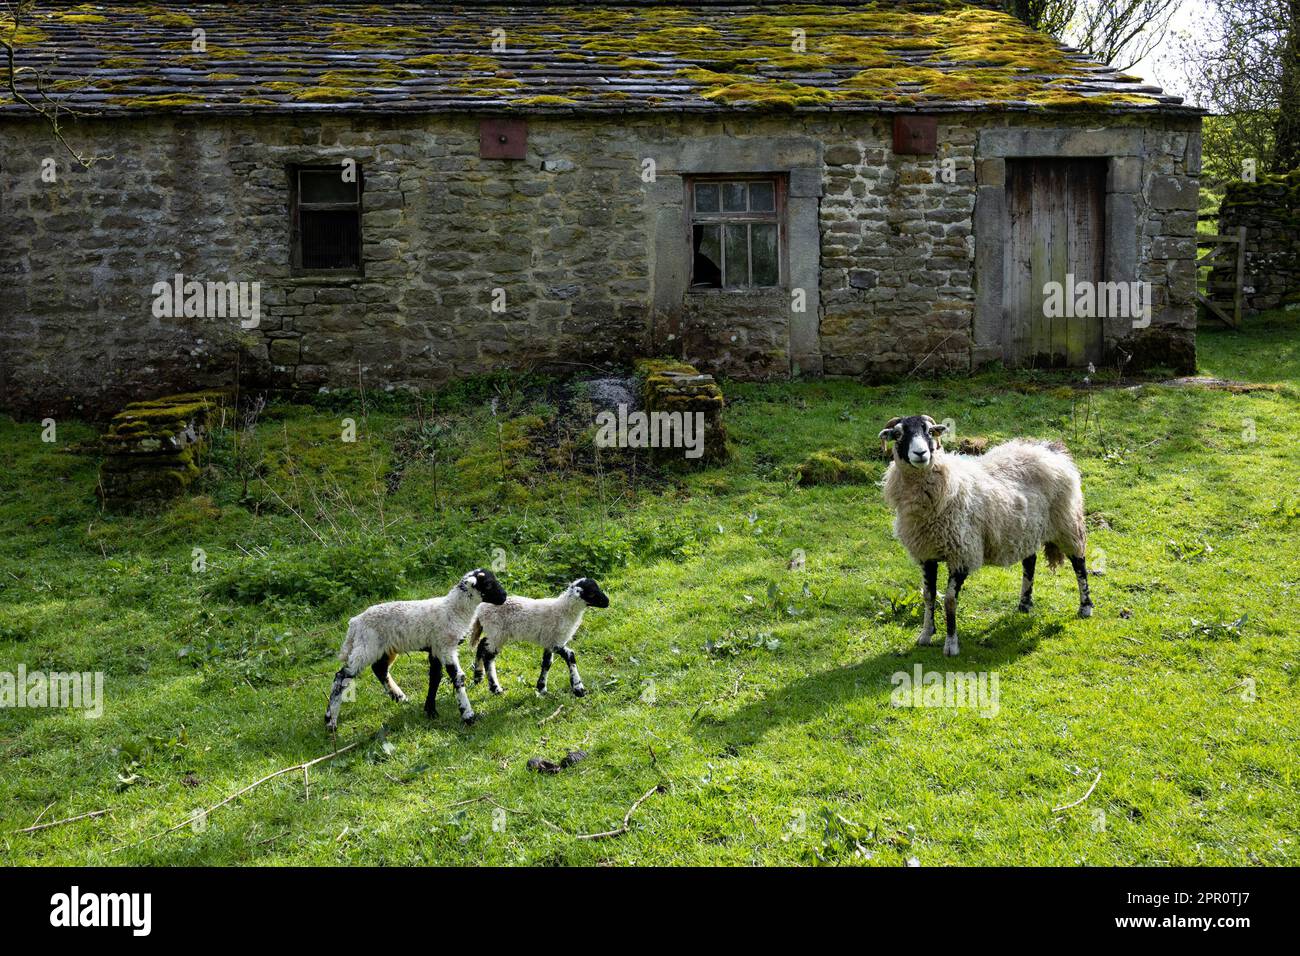 Yorkshire Dales scene - Swaledale ewe and lambs in front of old stone building - Yorkshire Dales, England, UK Stock Photo